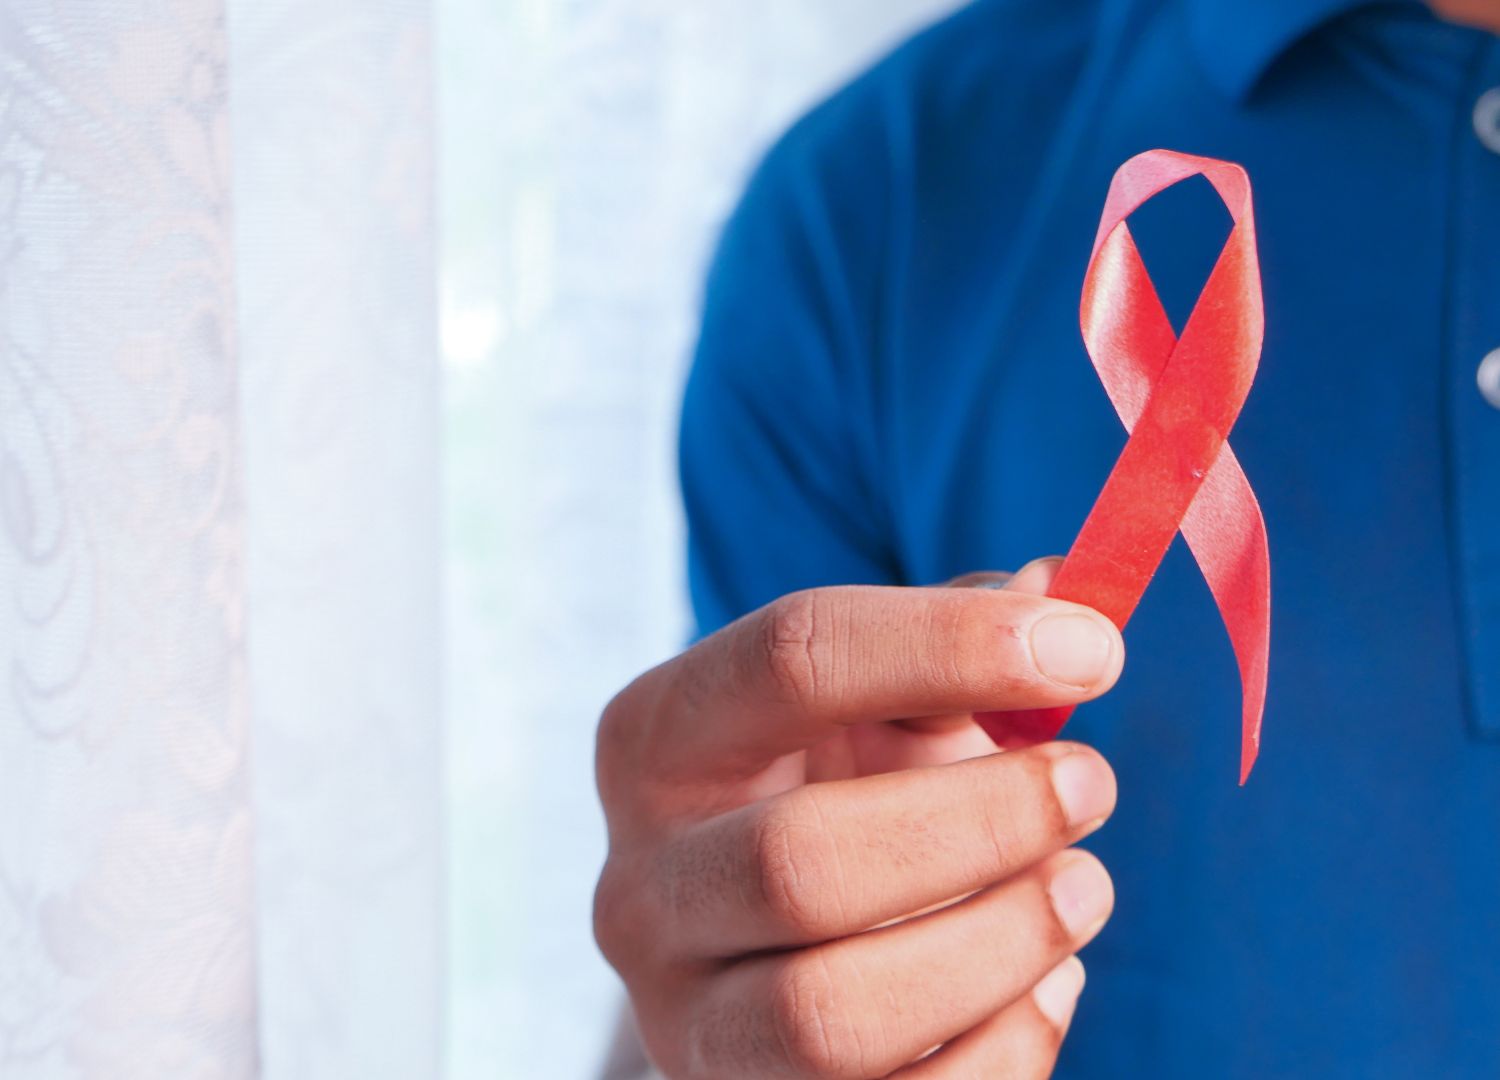 Dealing with a diagnosis of HIV/AIDS